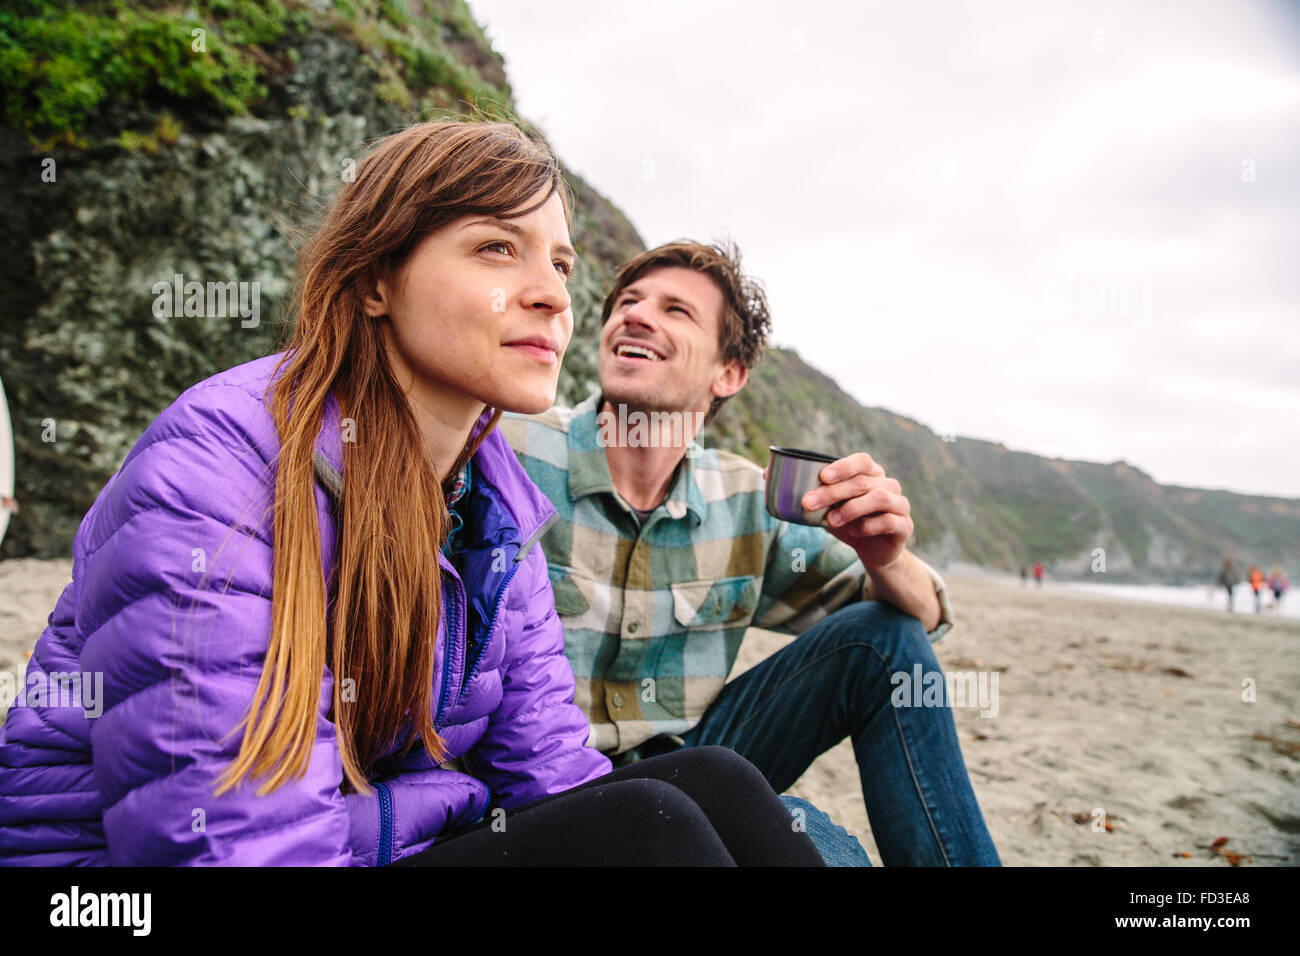 A young couple enjoying an afternoon on the beaches of Big Sur, California. Stock Photo